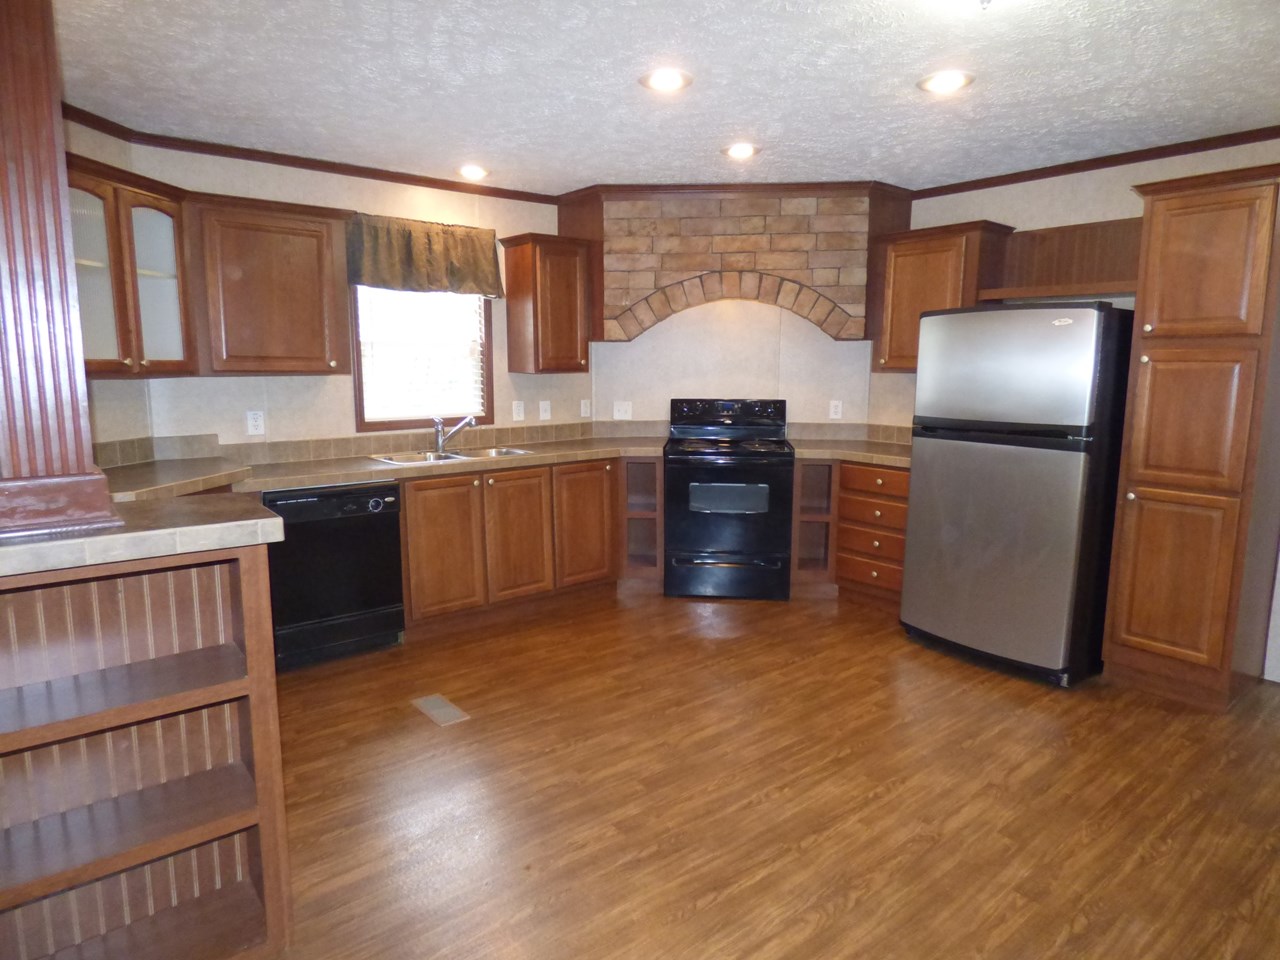 has new hickory laminate floors, new stainless stove.